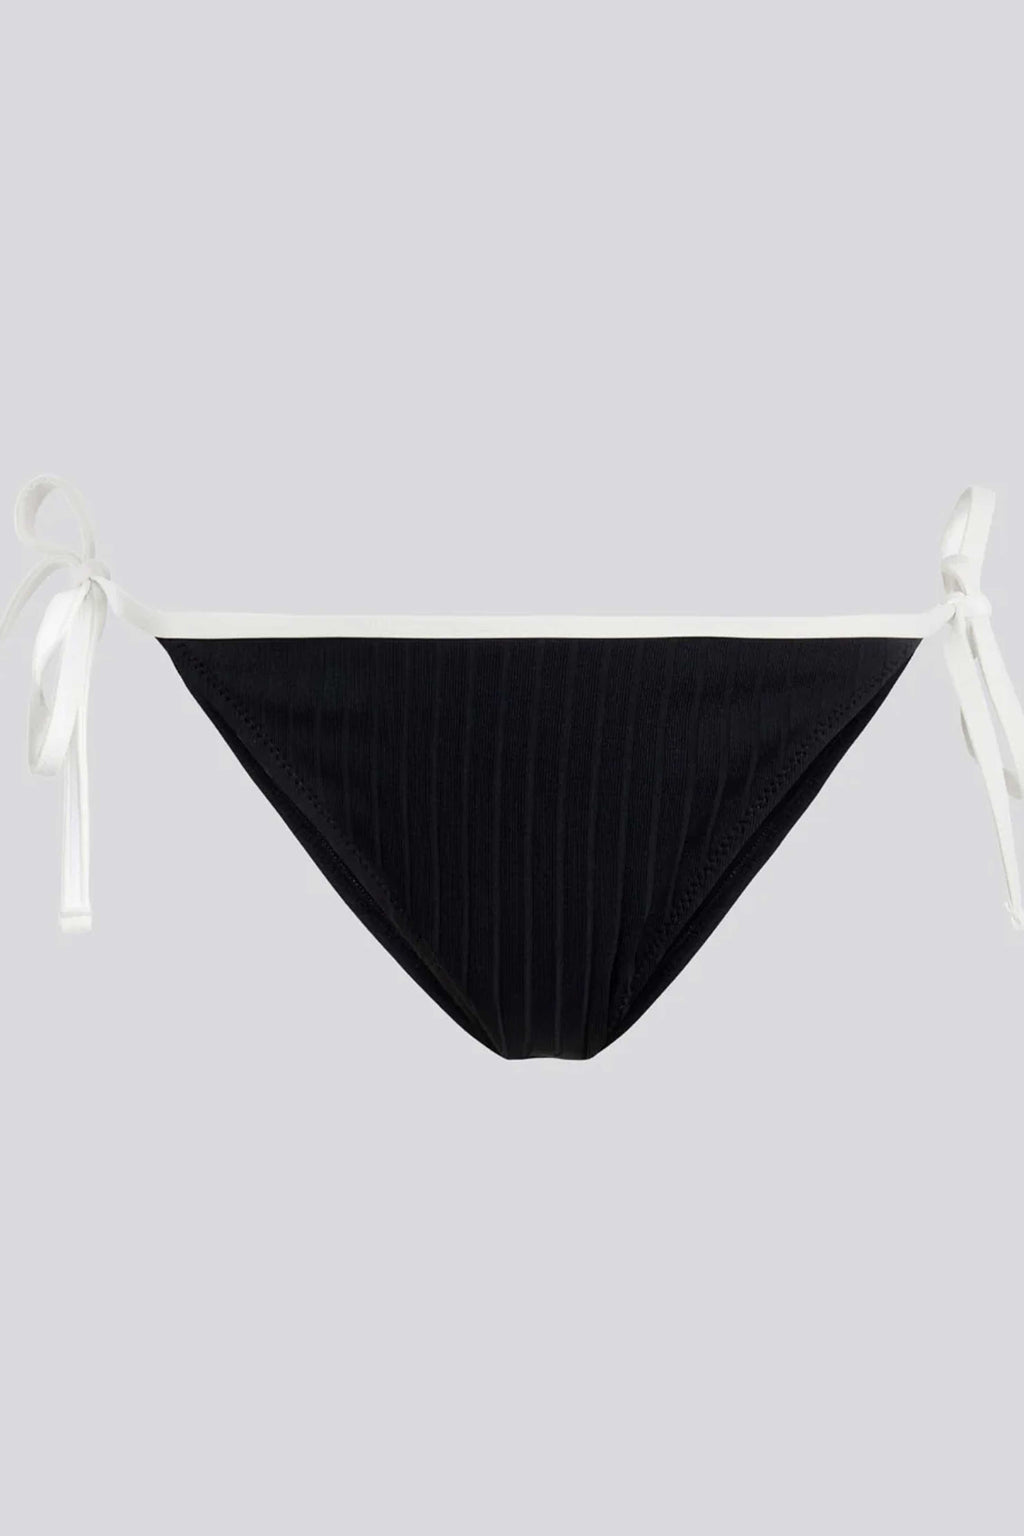 SOLID & STRIPED | The Iris Bottom - Blackout